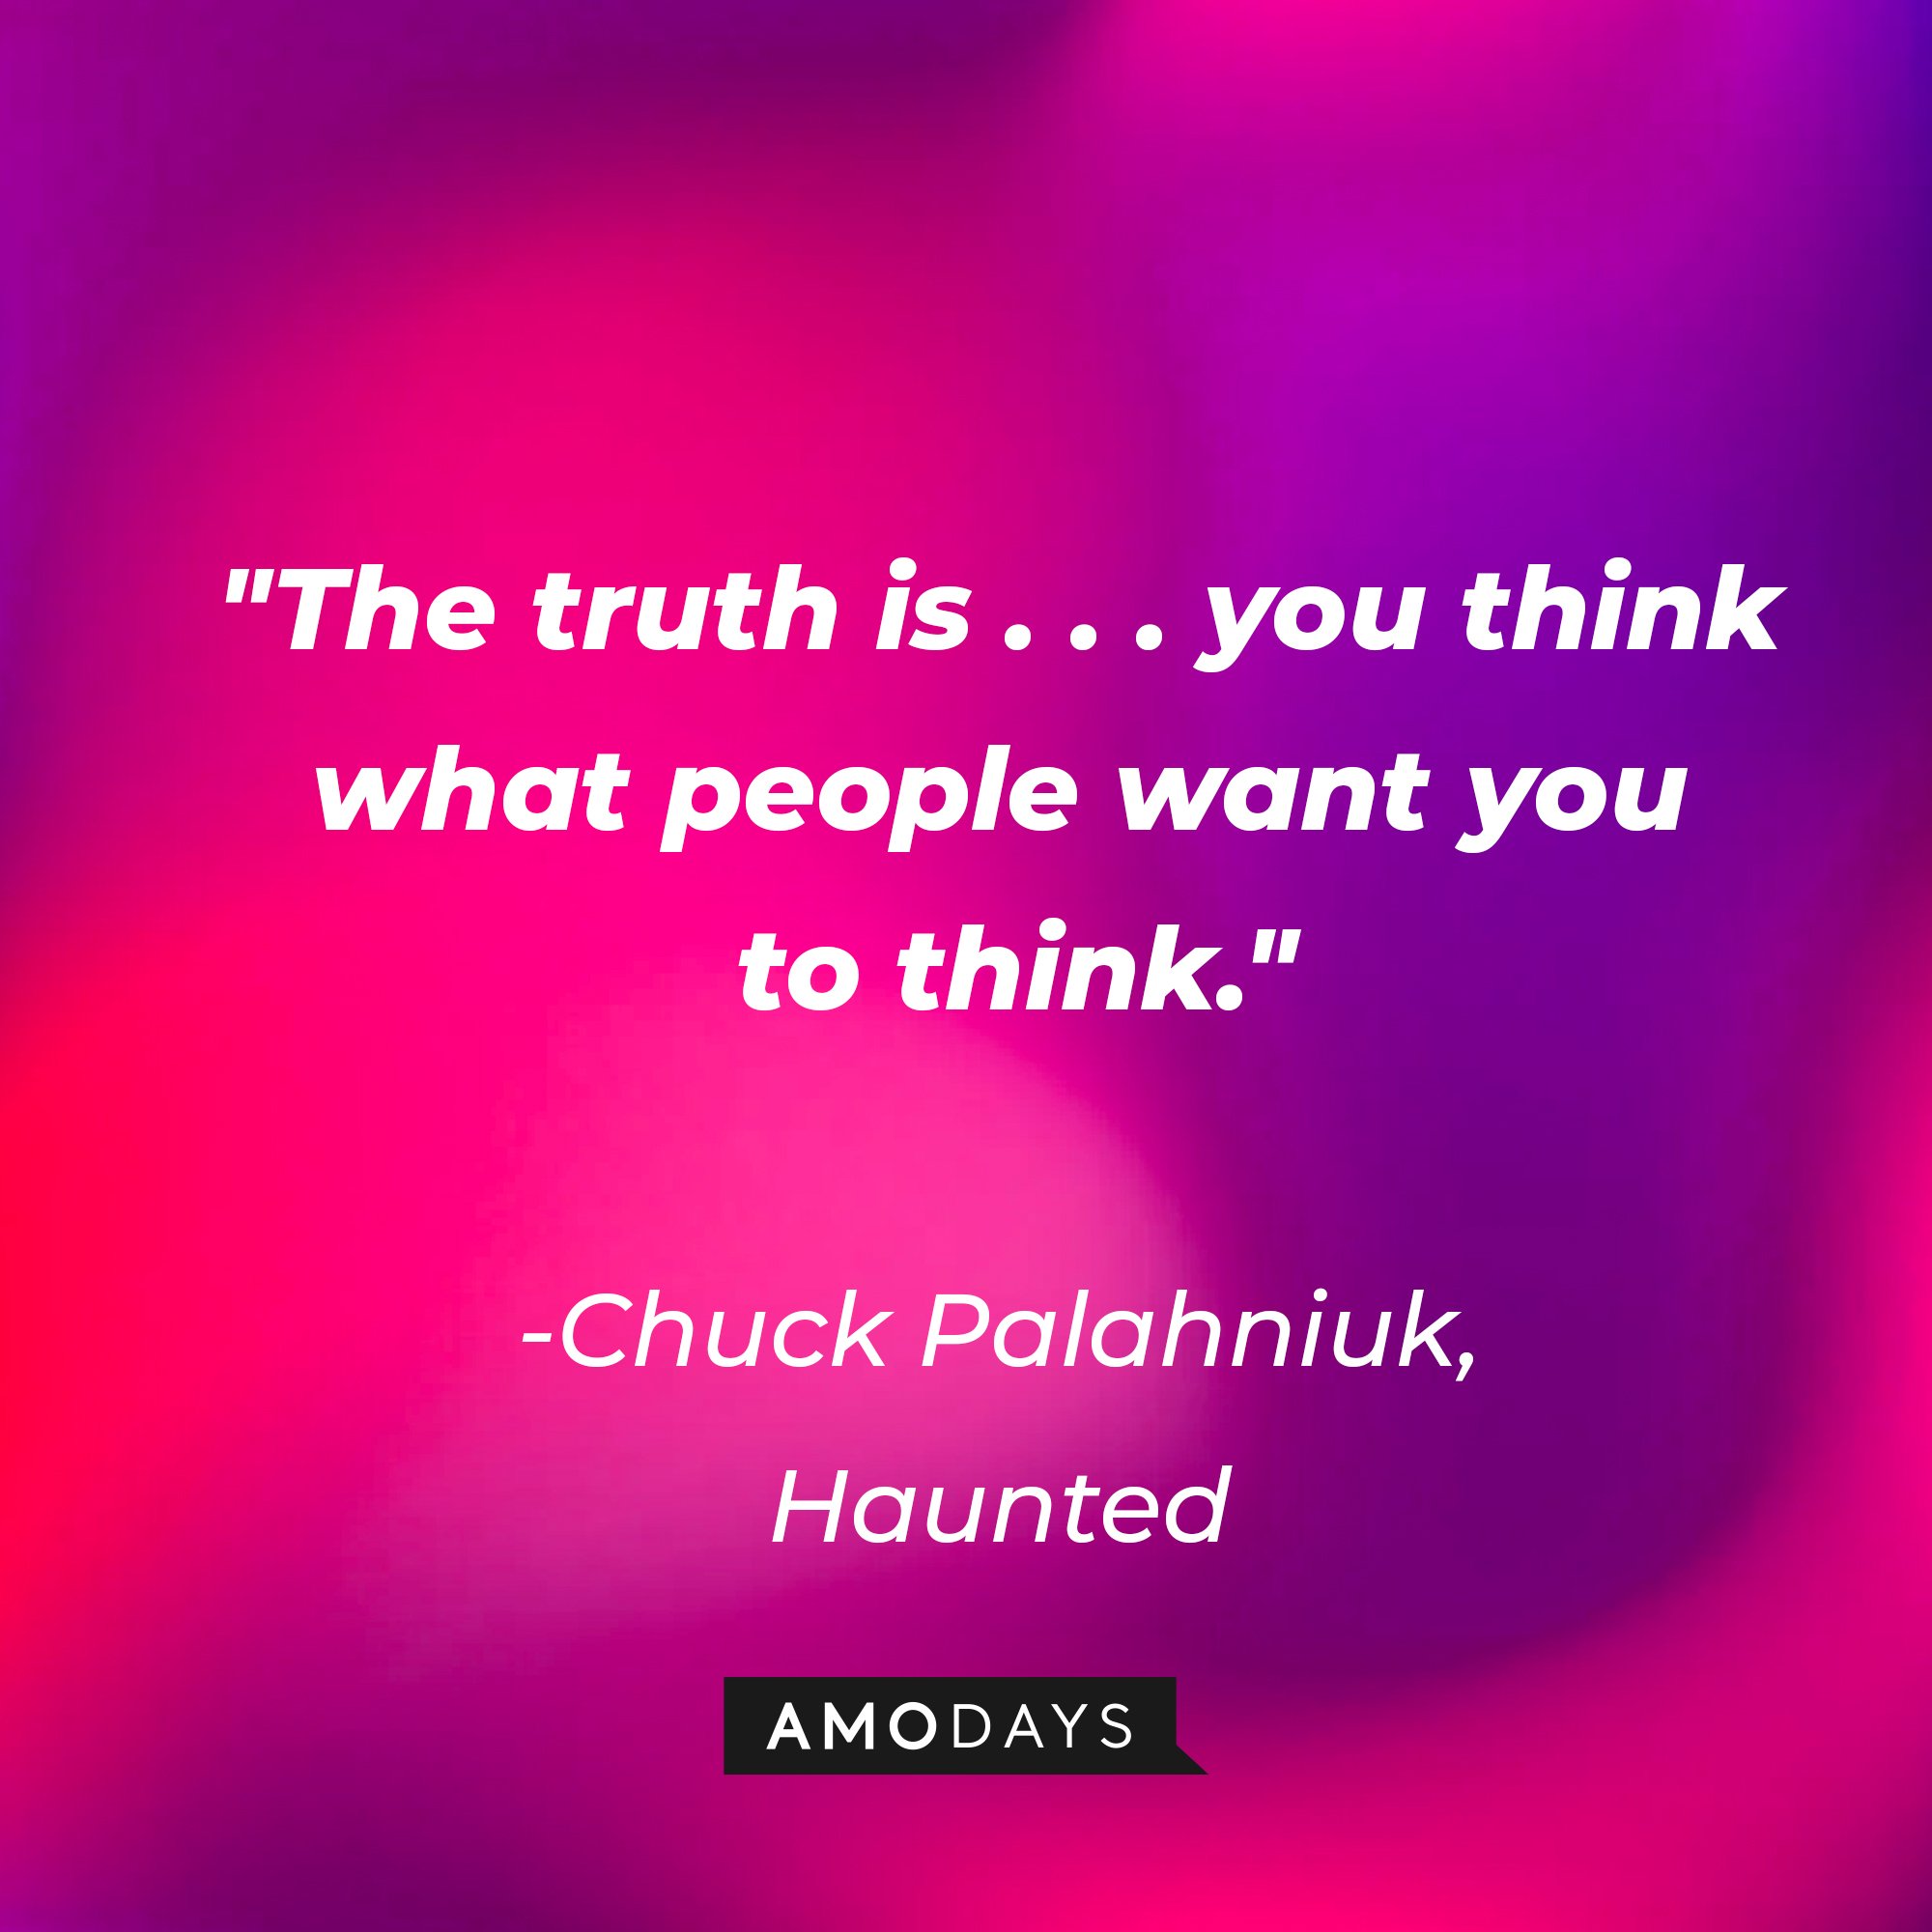 Chuck Palahniuk's quote: "The truth is . . . you think what people want you to think." | Image: Amodays